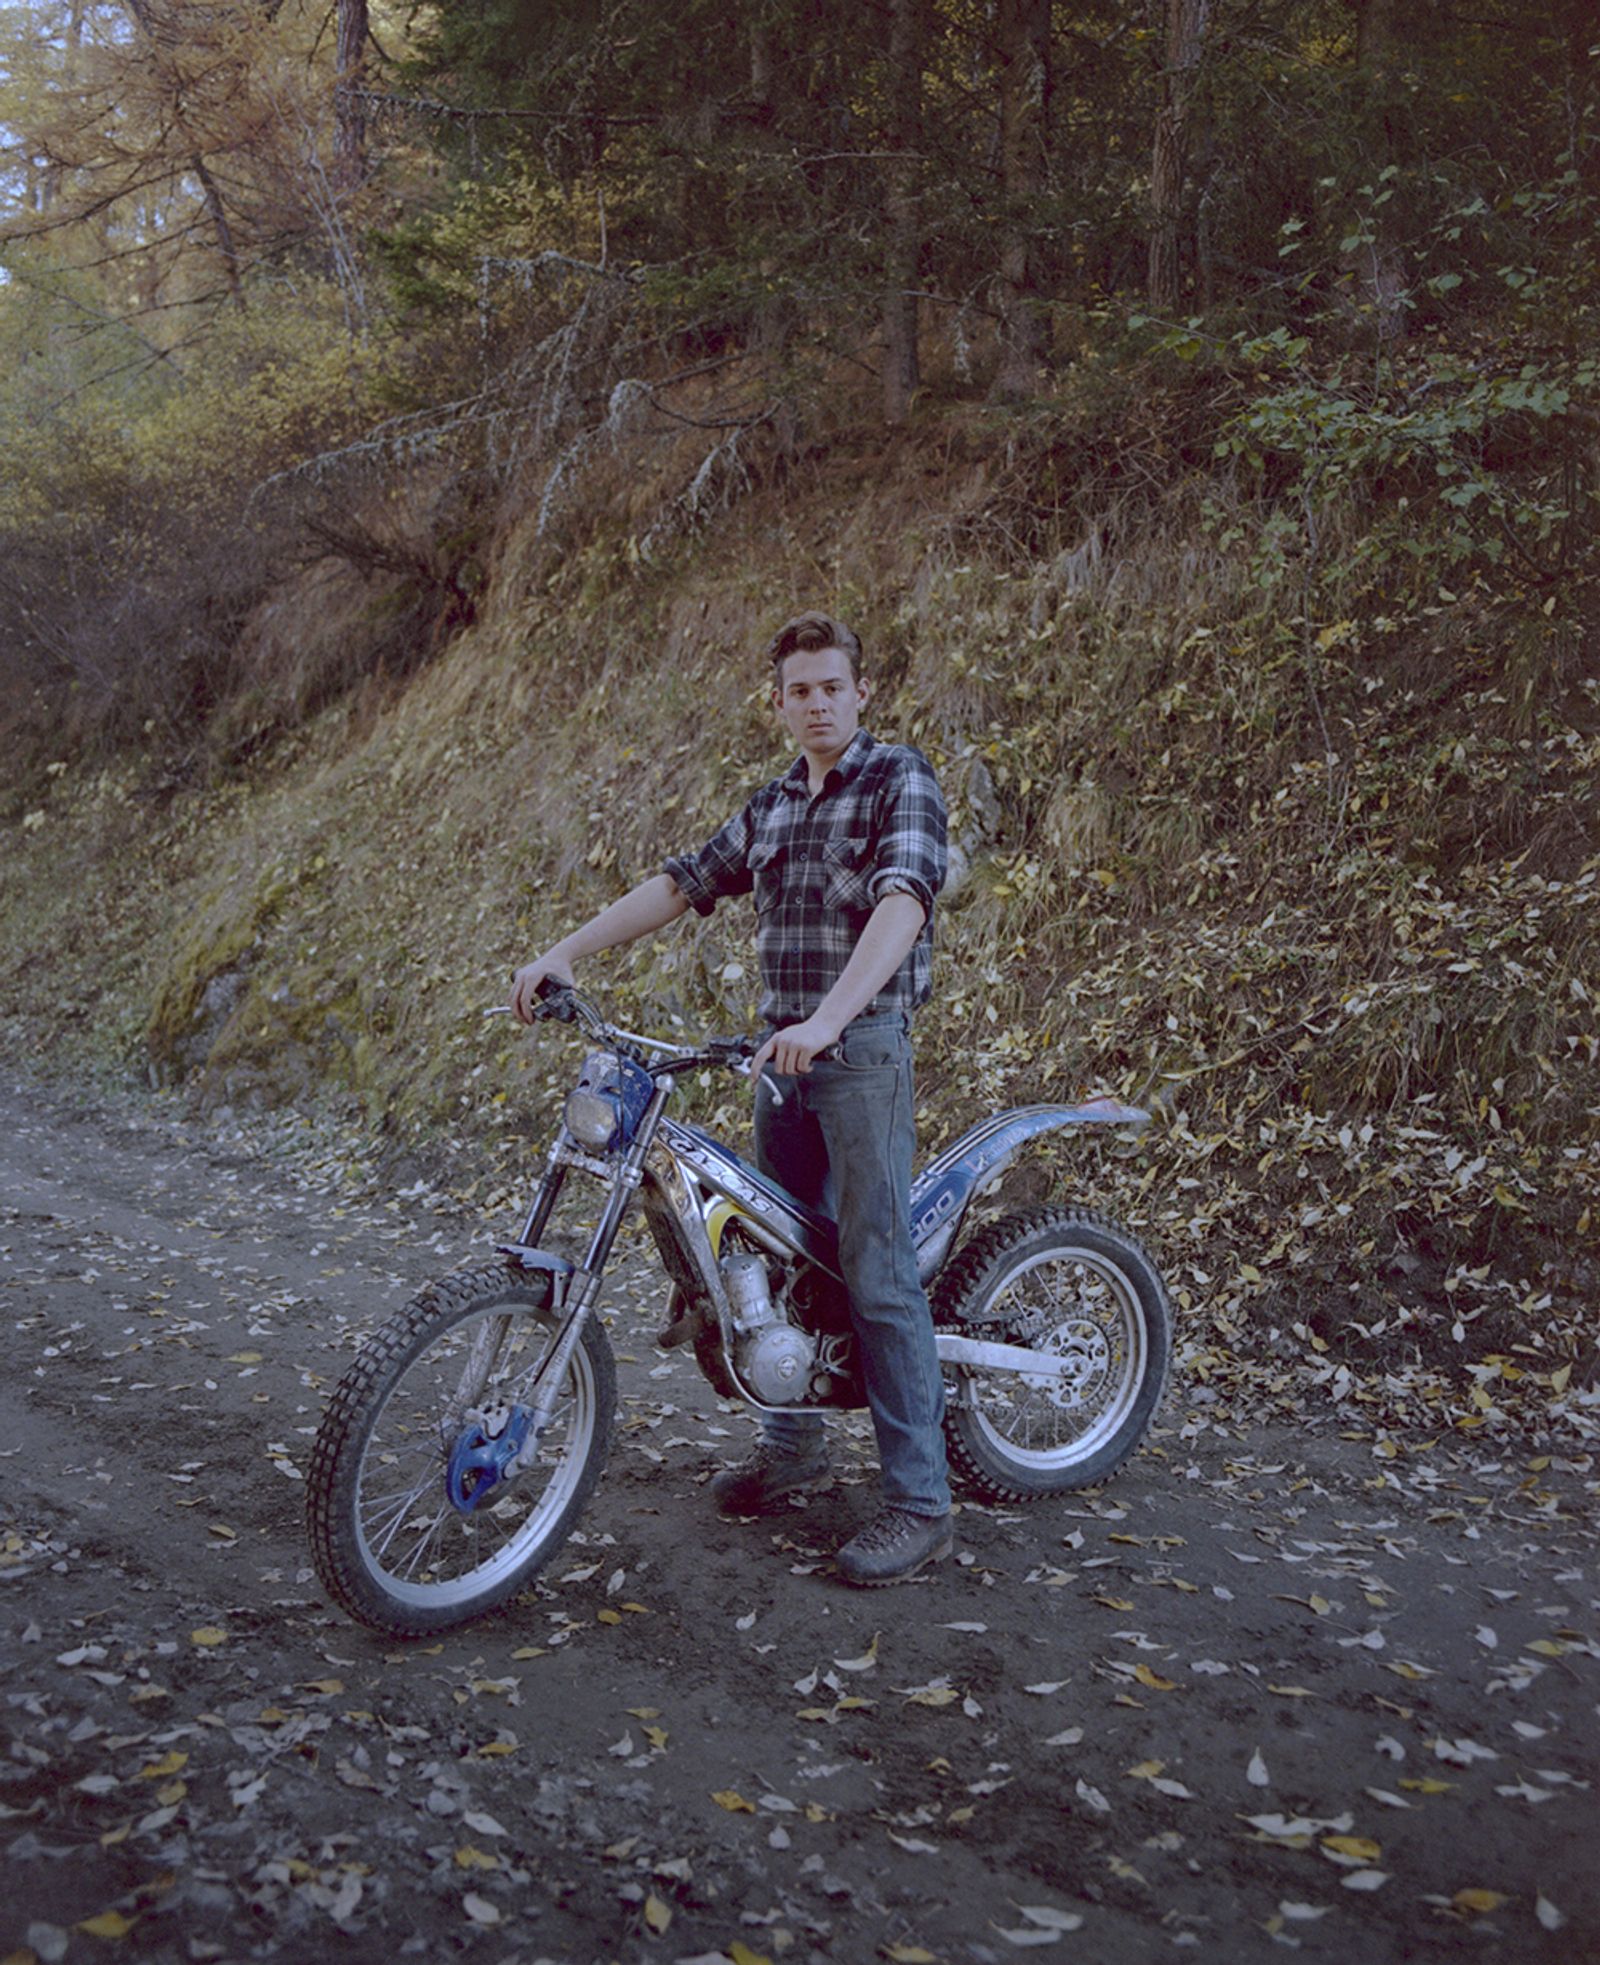 © Nola Minolfi - Claudio, 17 years old.He loves to do trial with his motorbike among the woods.